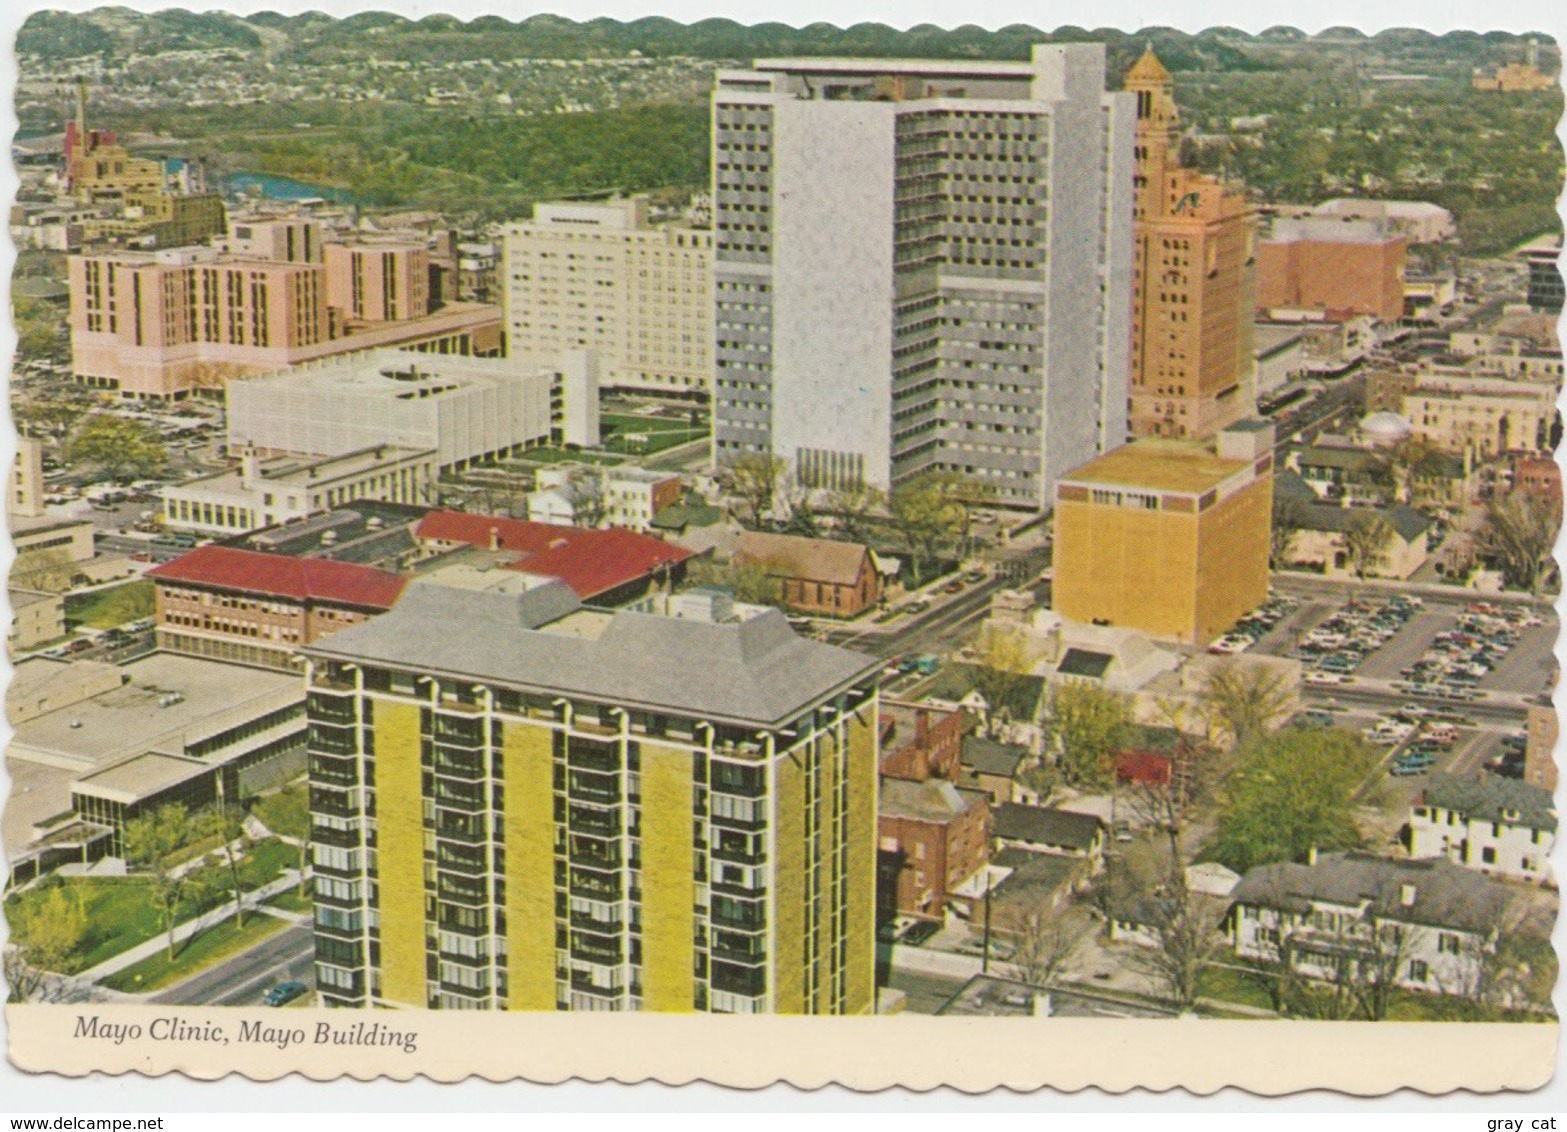 Mayo Clinic, Mayo Building, Rochester, Minnesota, 1980 Used Postcard [20832] - Rochester